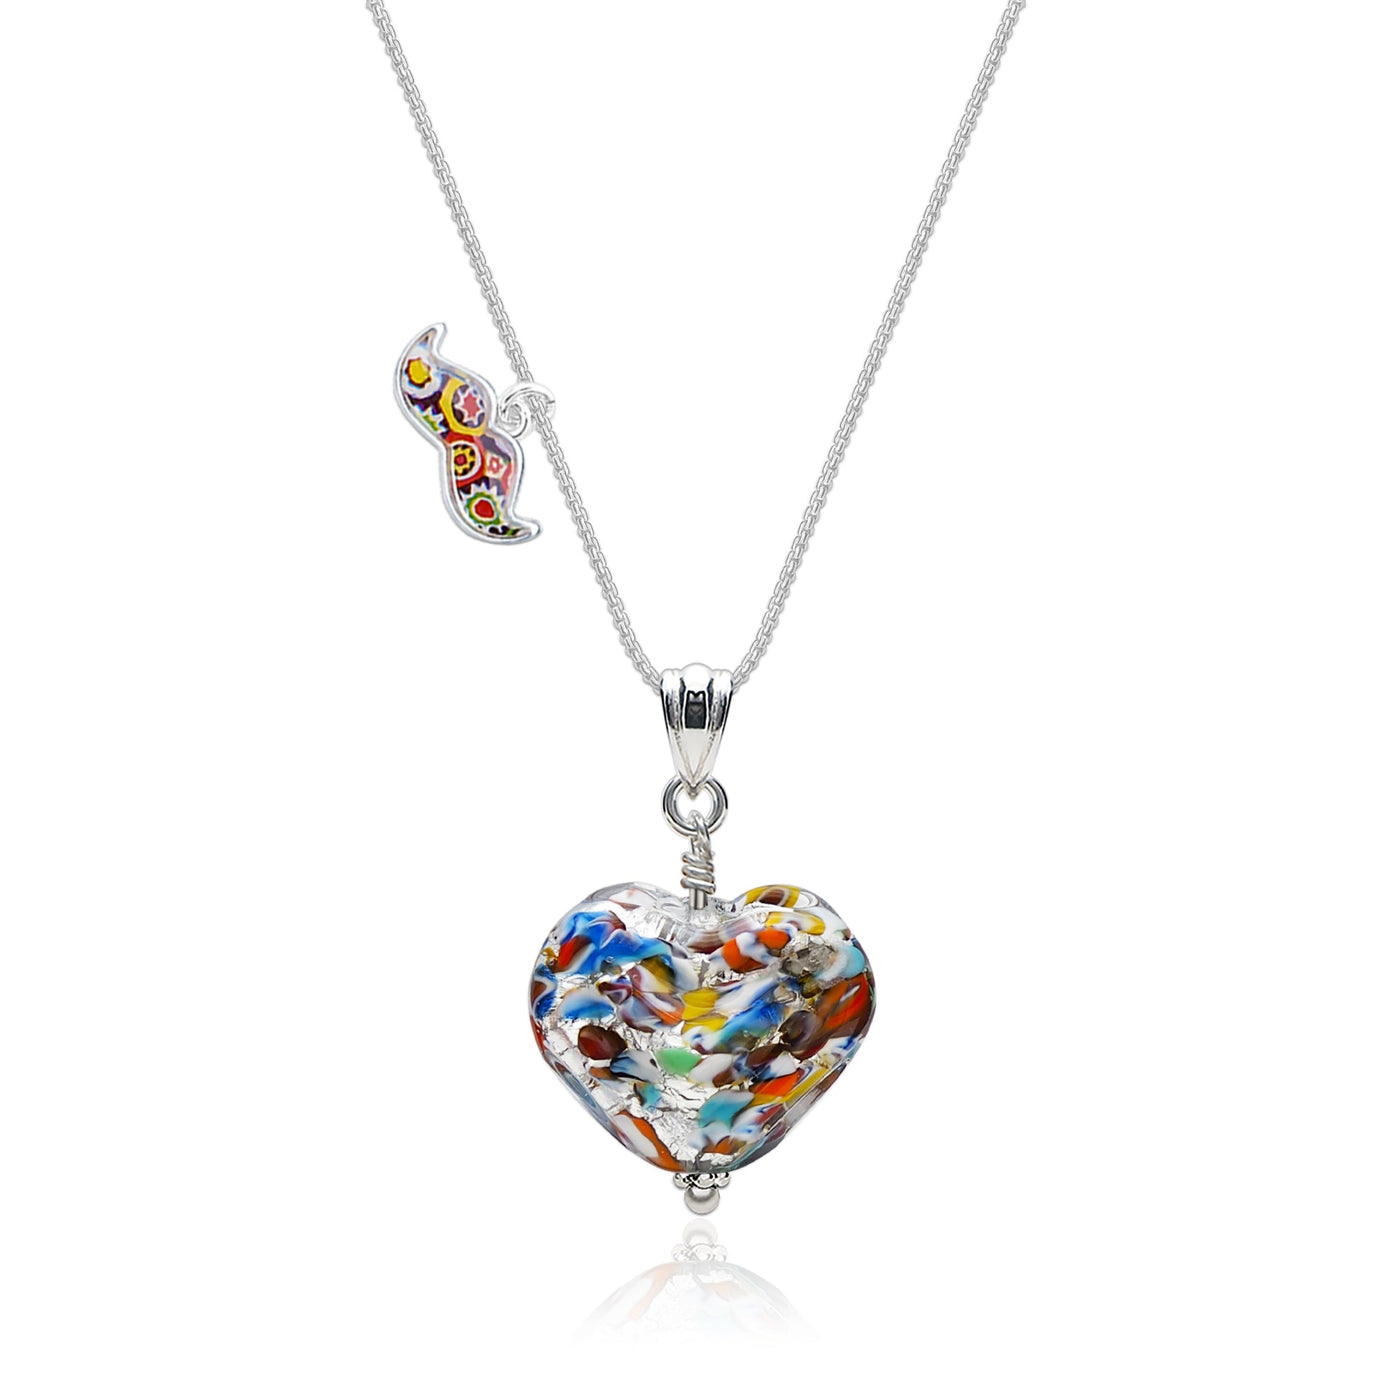 THE KISS | Classic Silver Double Heart Necklace - Leather - Pendant Necklace